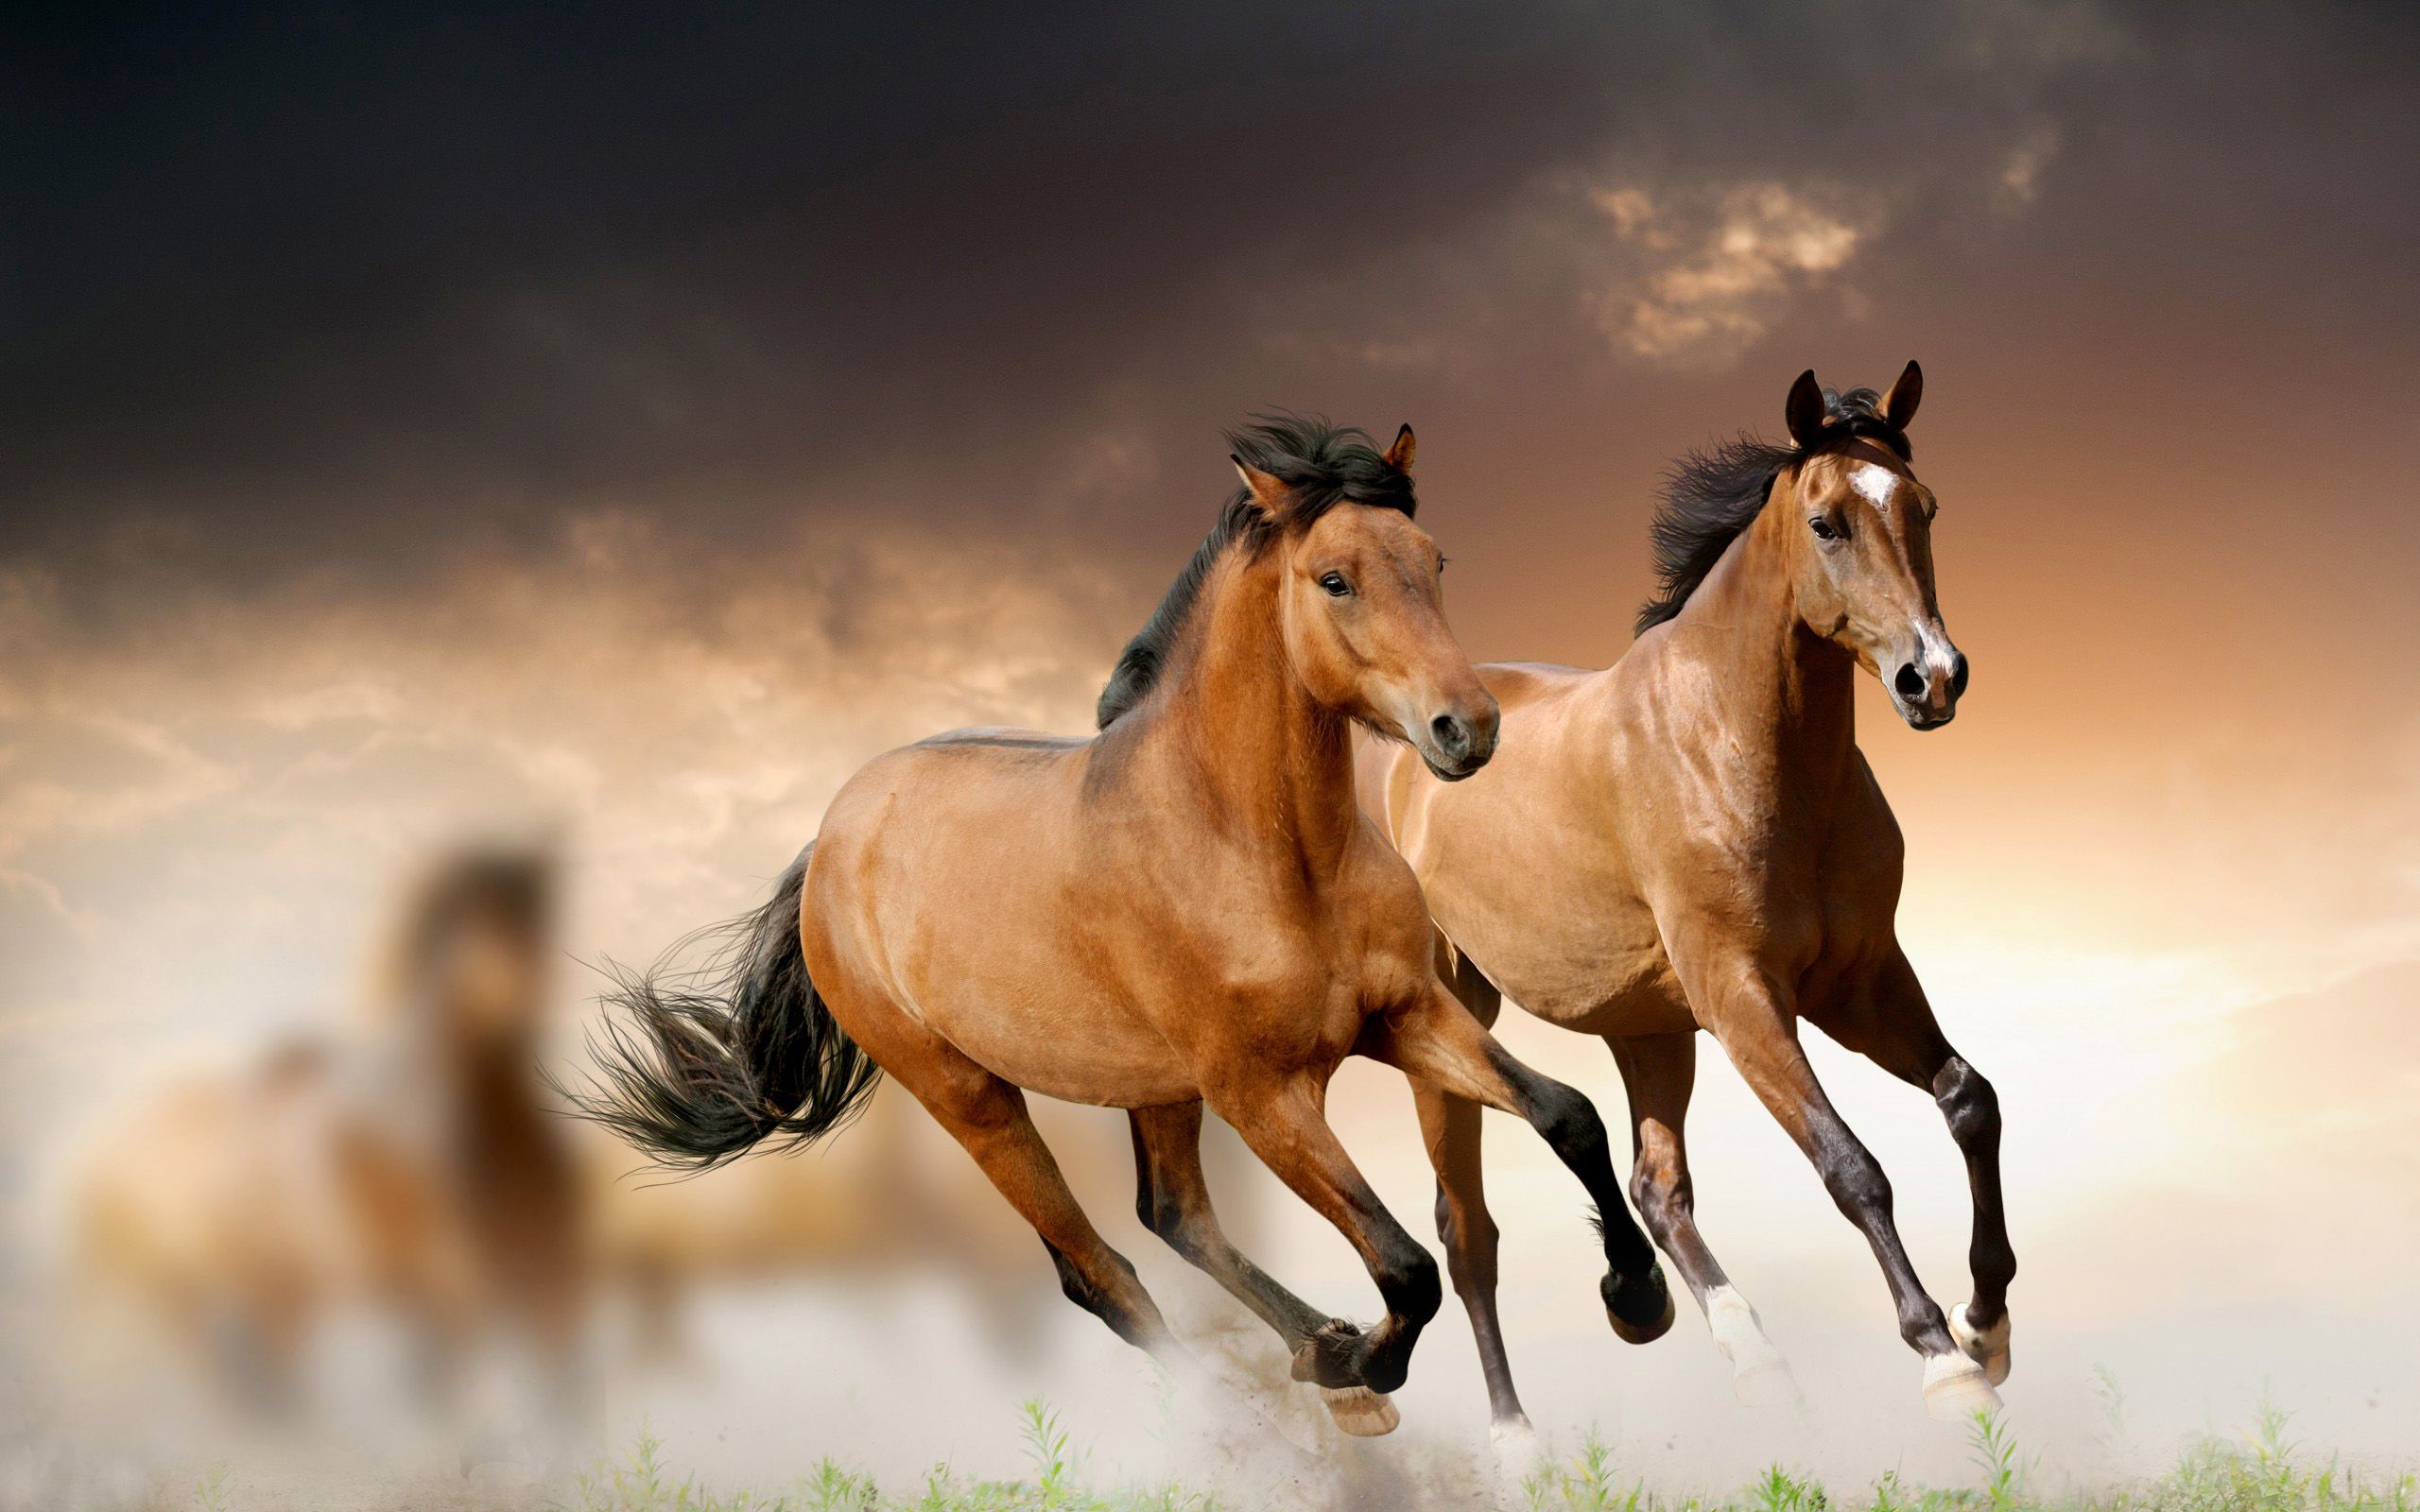 The Best Wild Horse Wallpaper Background For